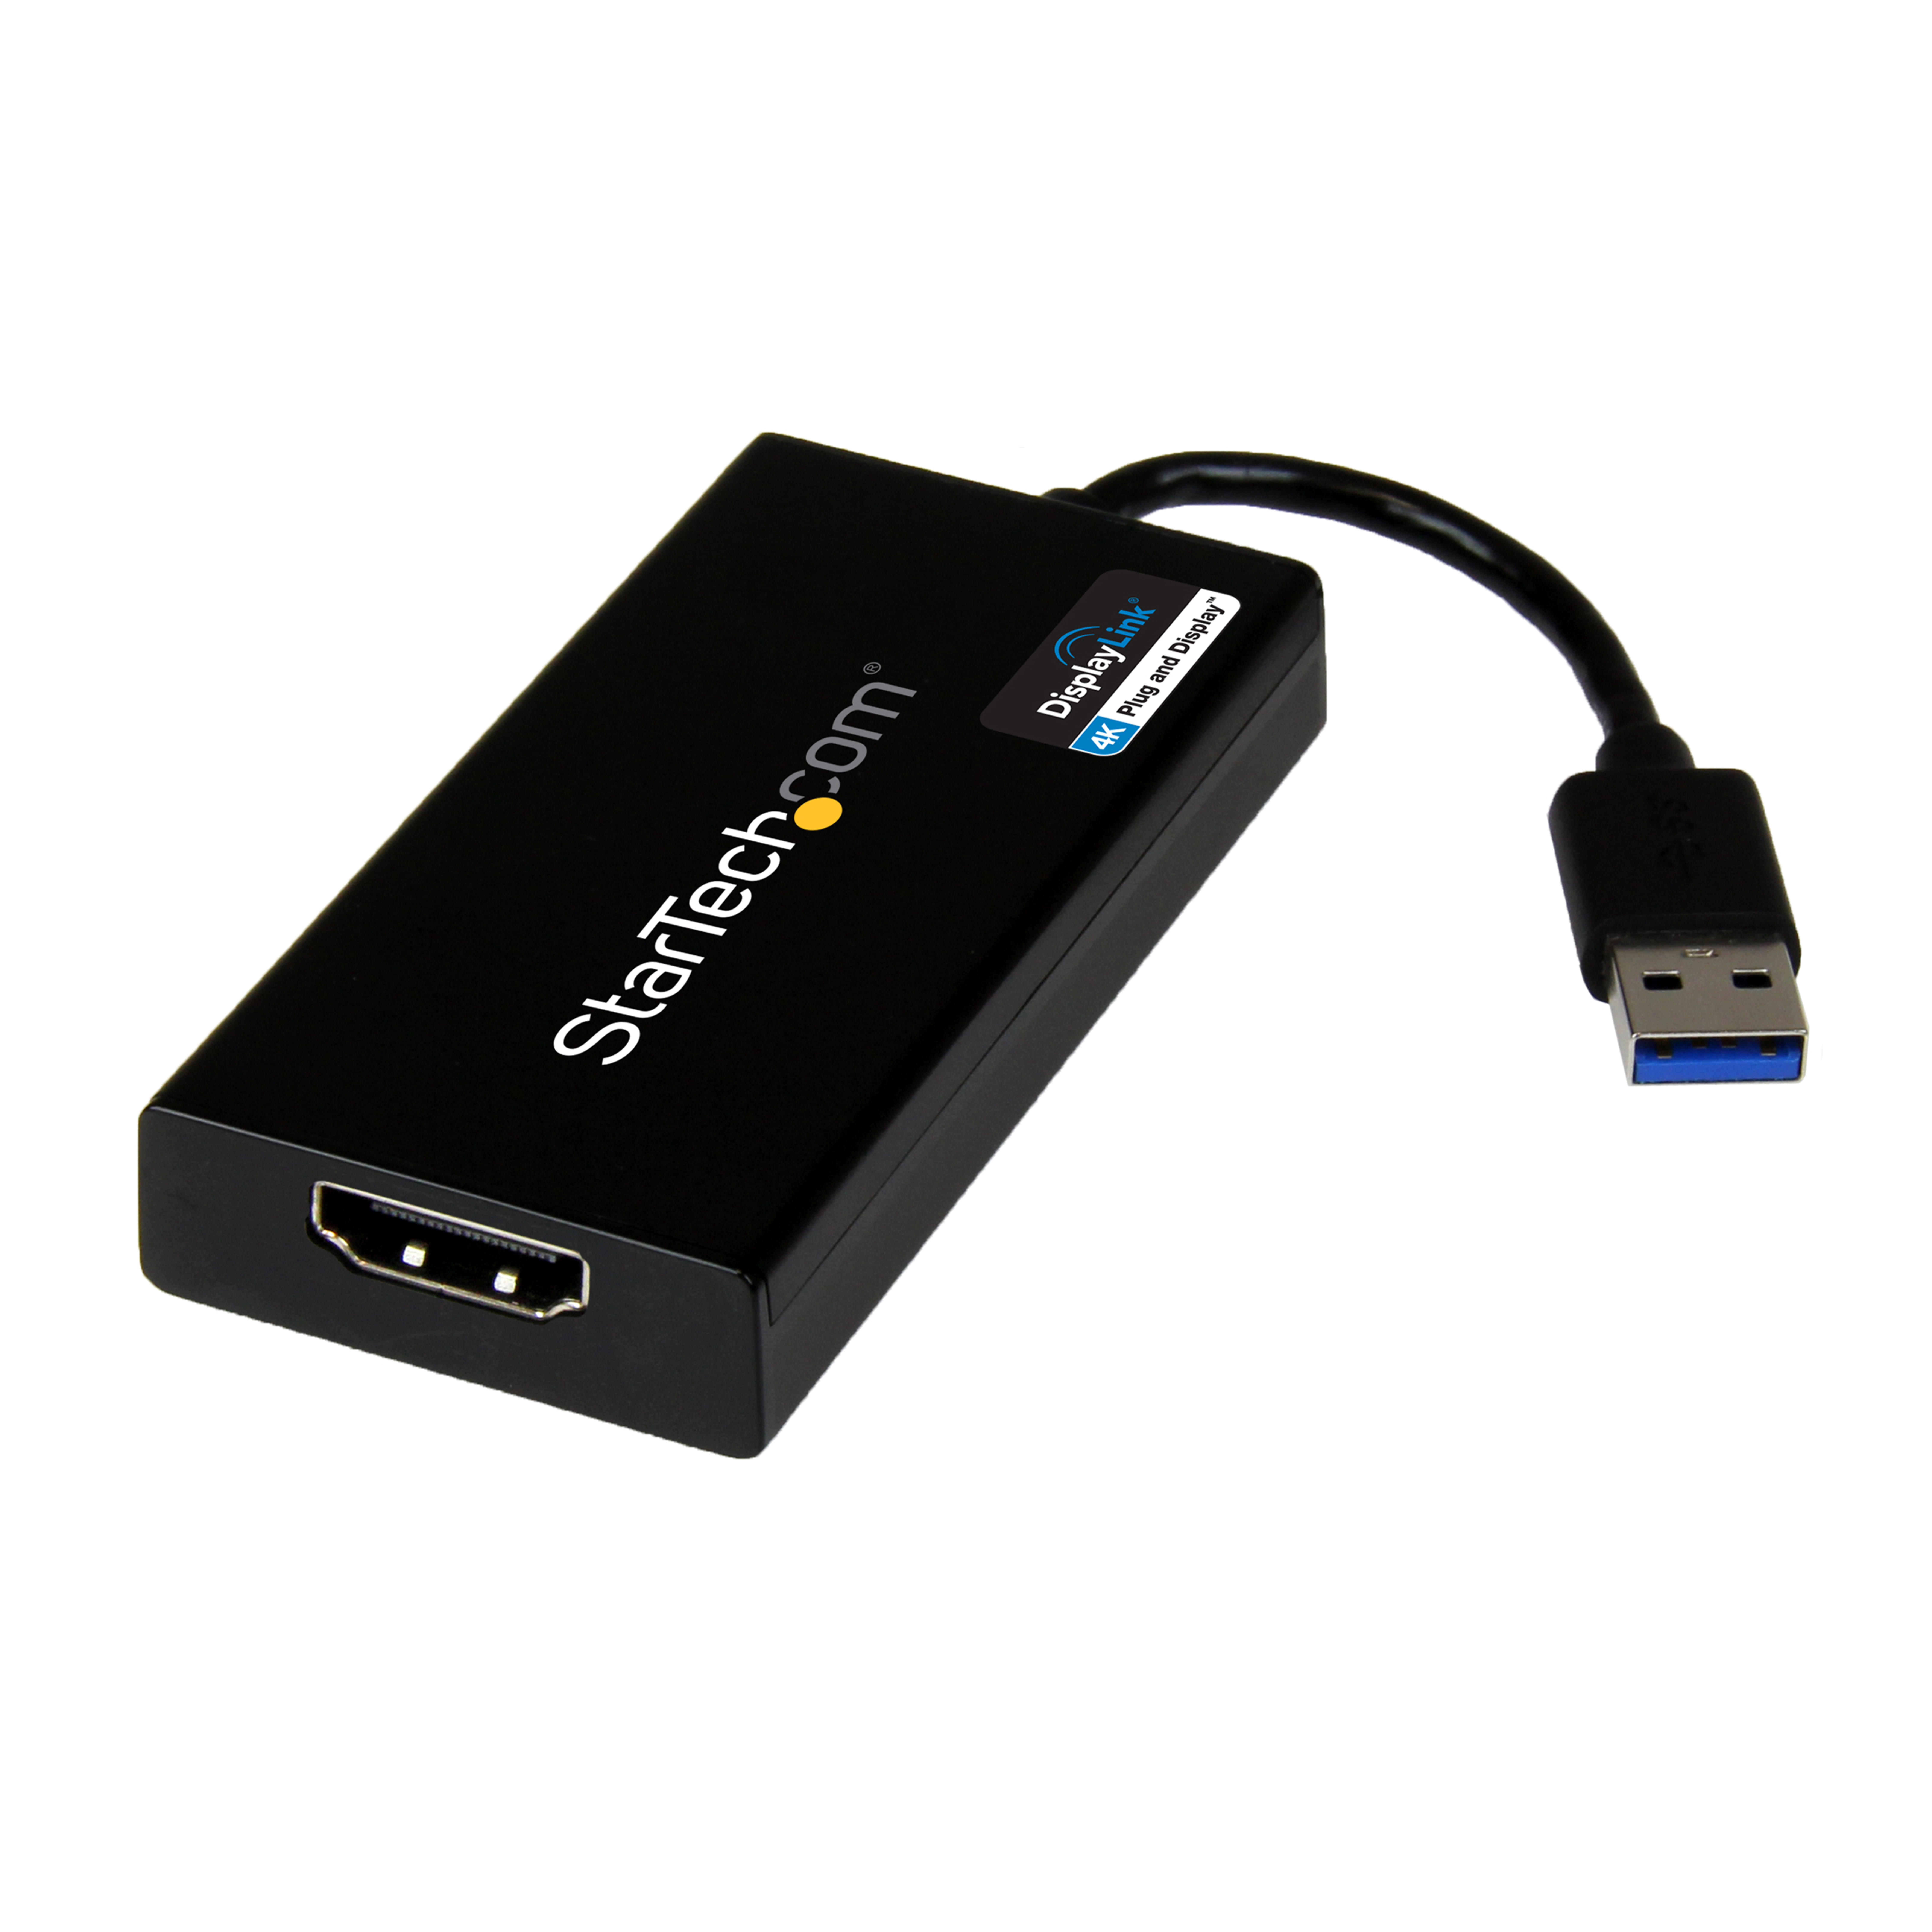 StarTech.com USB 3.0 to HDMI Adapter, 4K 30Hz Ultra HD, DisplayLink Certified, USB Type-A to HDMI Display Adapter Converter for Monitor, External Video & Graphics Card, Mac & Windows - USB to HDMI Adapter (USB32HD4K)